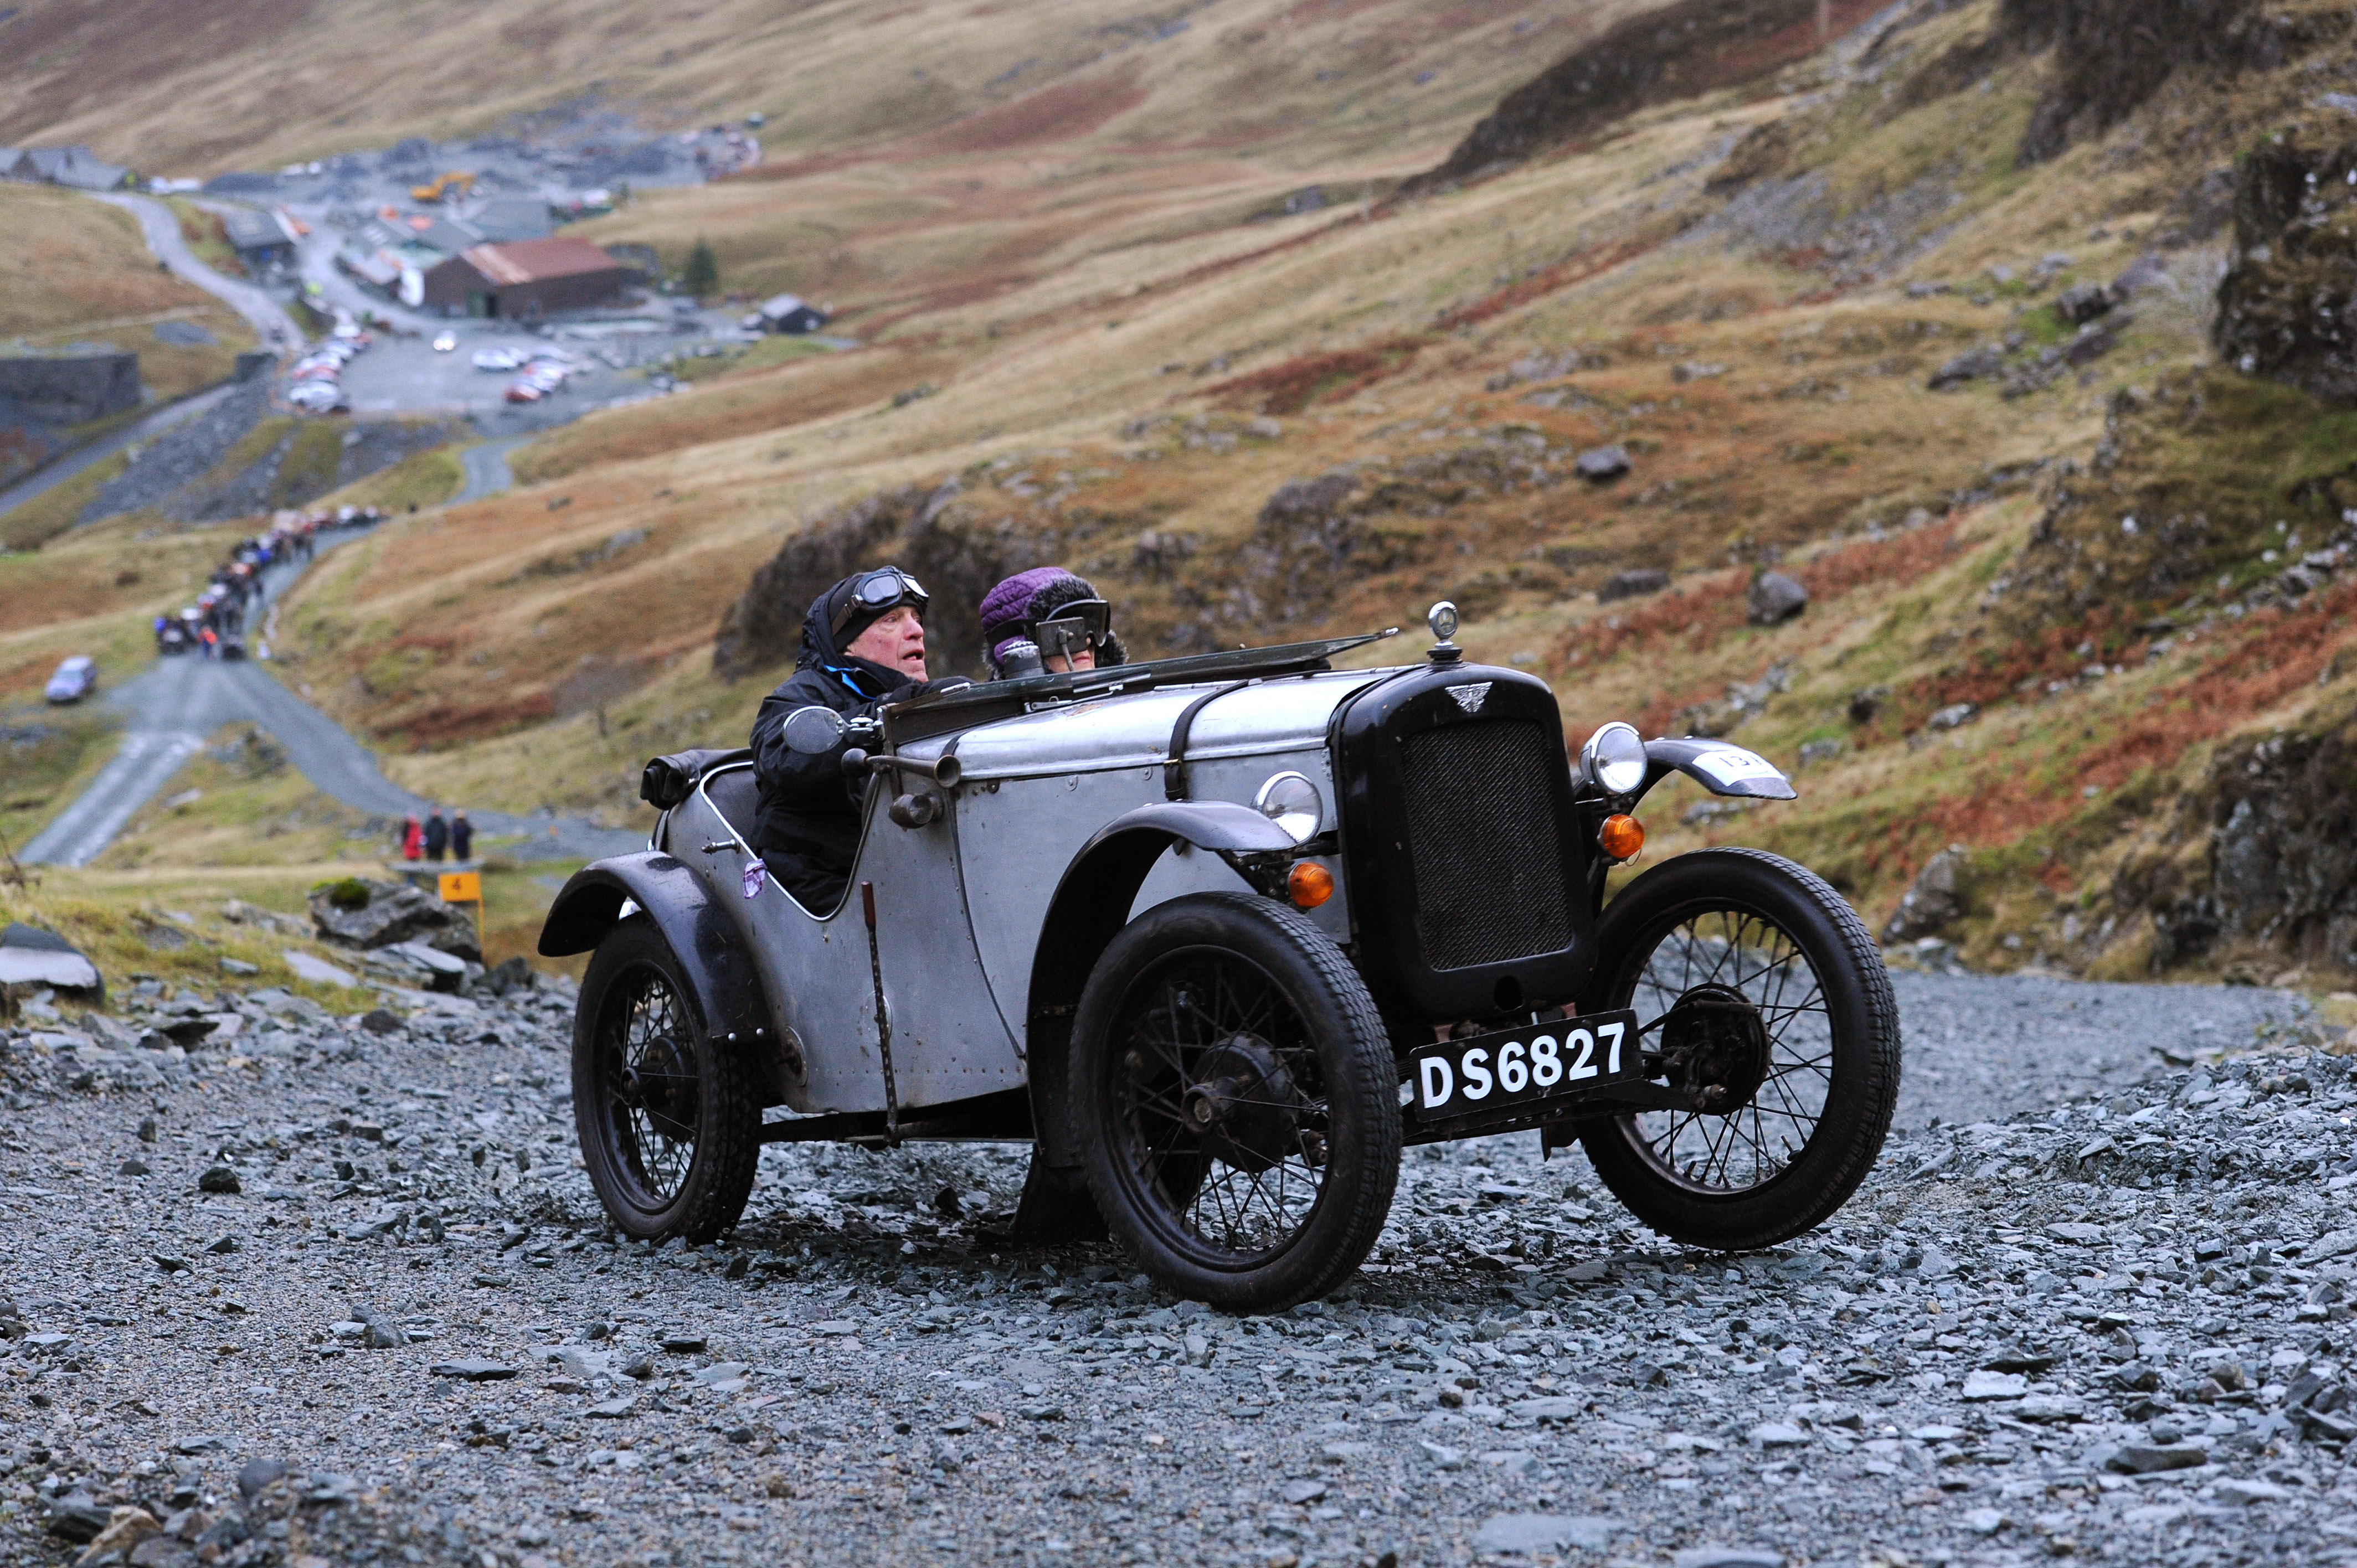 KESWICK, UNITED KINGDOM - NOVEMBER 08: Terry Gosling drives his Austin 7 Sports Ulster Rep during a vintage car rally stage at the Honister Slate Mine on November 8, 2014 in the Lake District, England. The event, part of the Lakeland Trials, is held annually by the Vintage Sports Car Club and challenges drivers and their machines through hairpin bends and rocky terrain against a backdrop of awe-inspiring scenery. (Photo by Anna Gowthorpe/Getty Images)